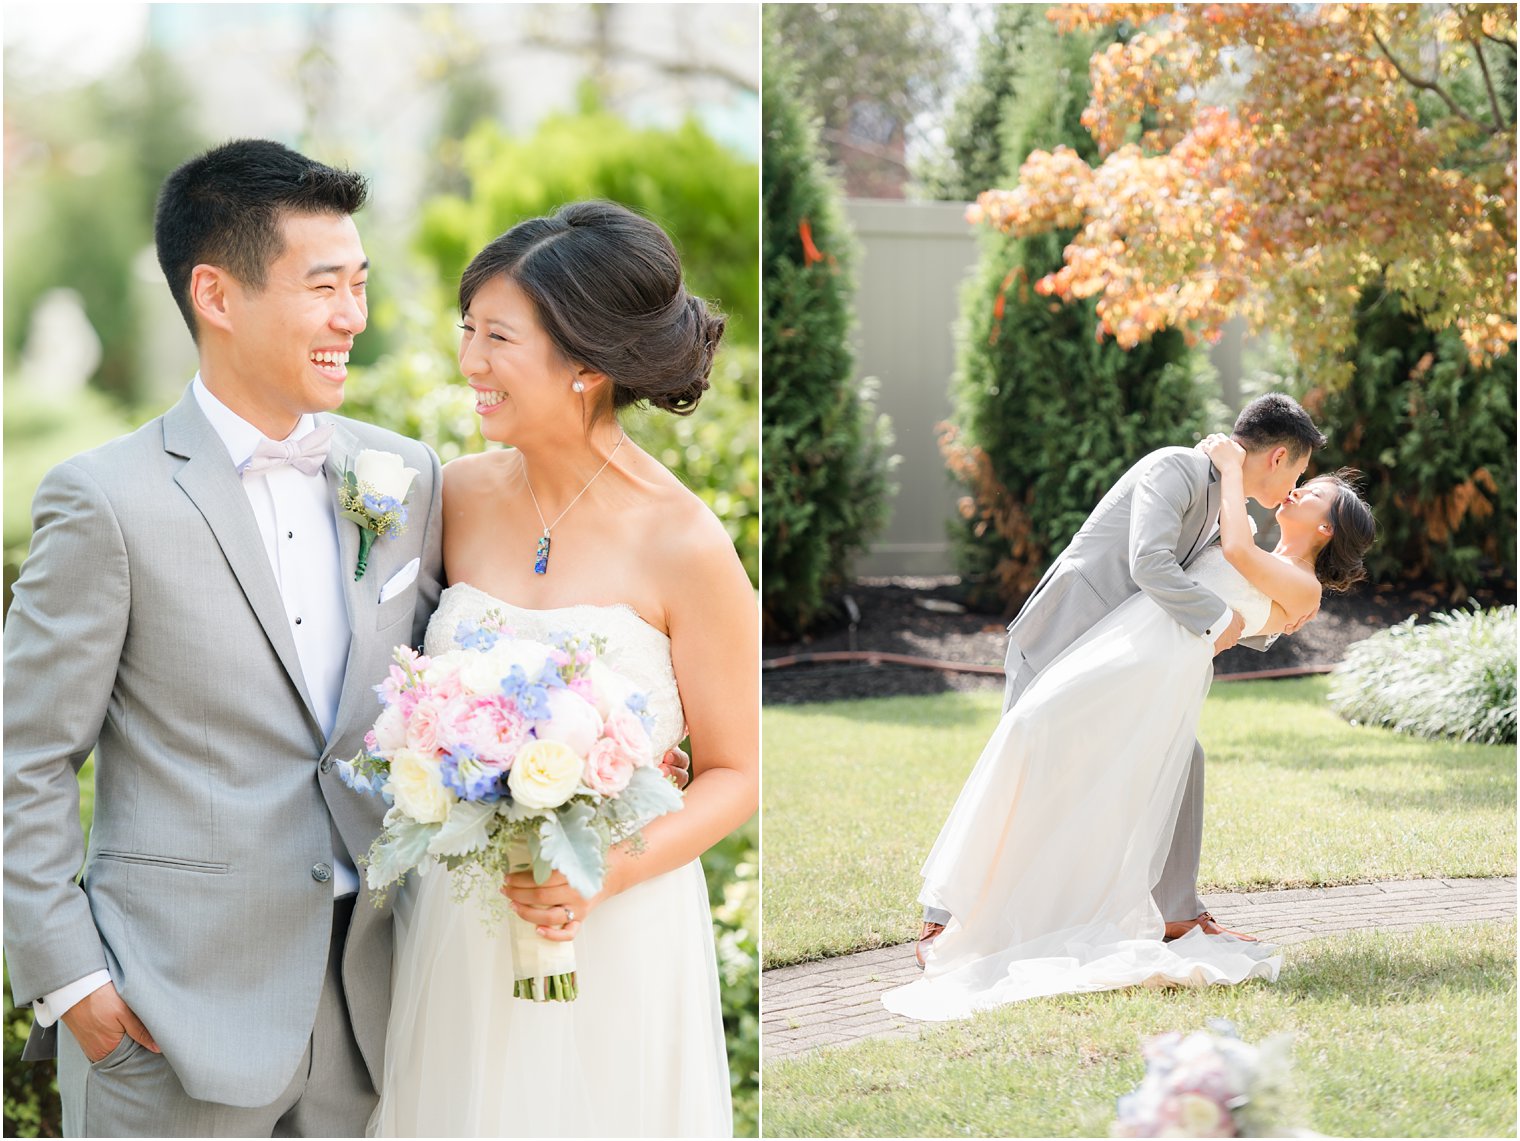 Romantic moments of joy with bride and groom at The Bethwood in New Jersey with Idalia Photography